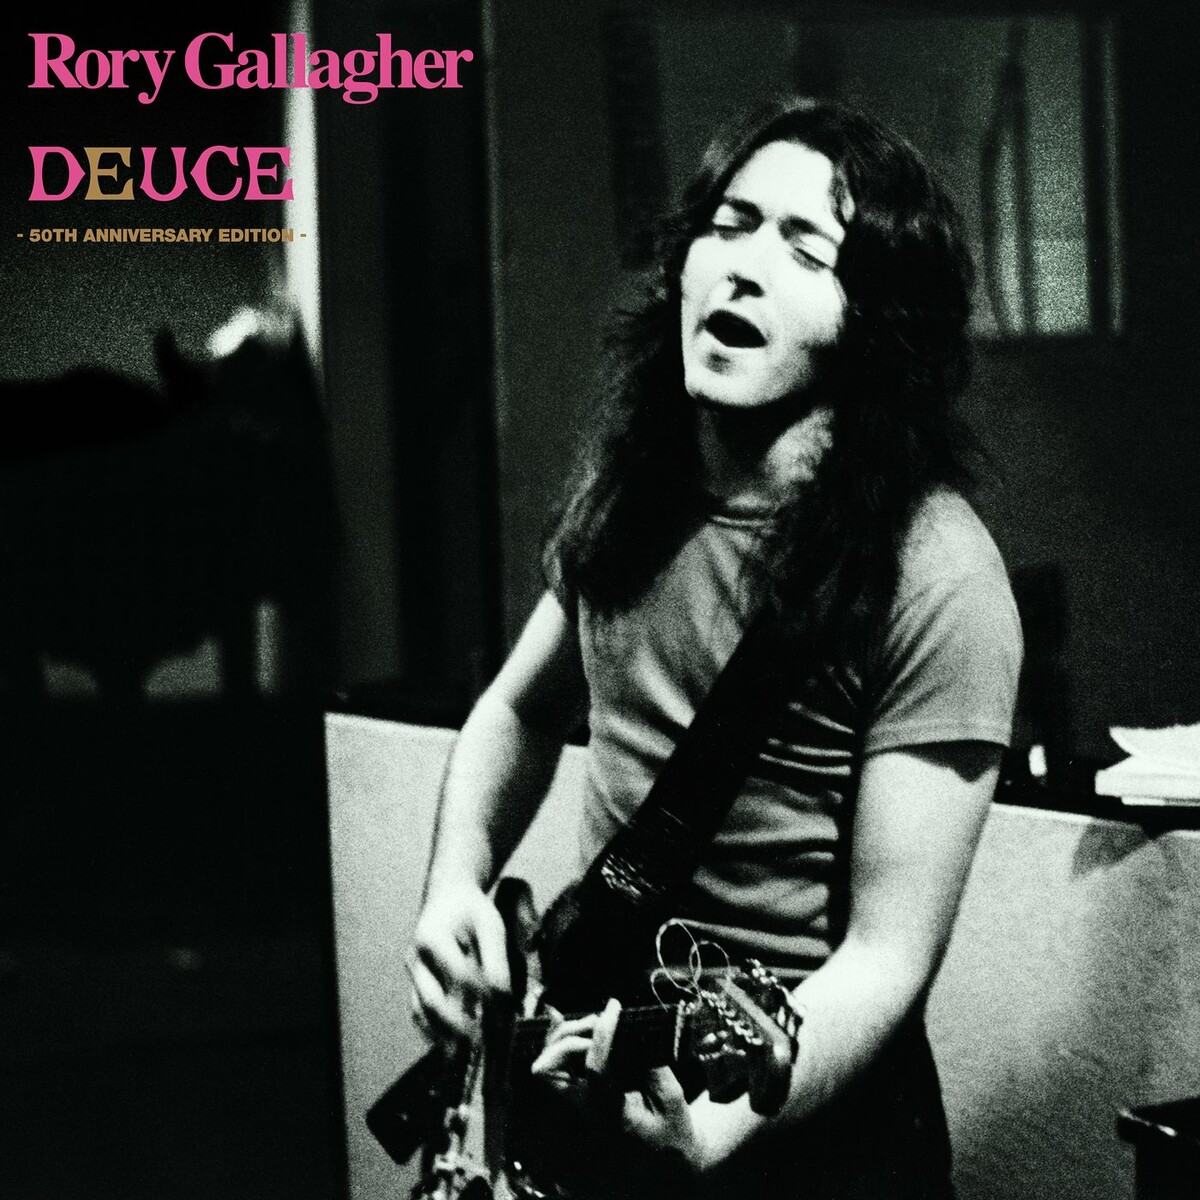 Rory Gallagher - Deuce (50th Anniversary) (2022) FLAC + MP3